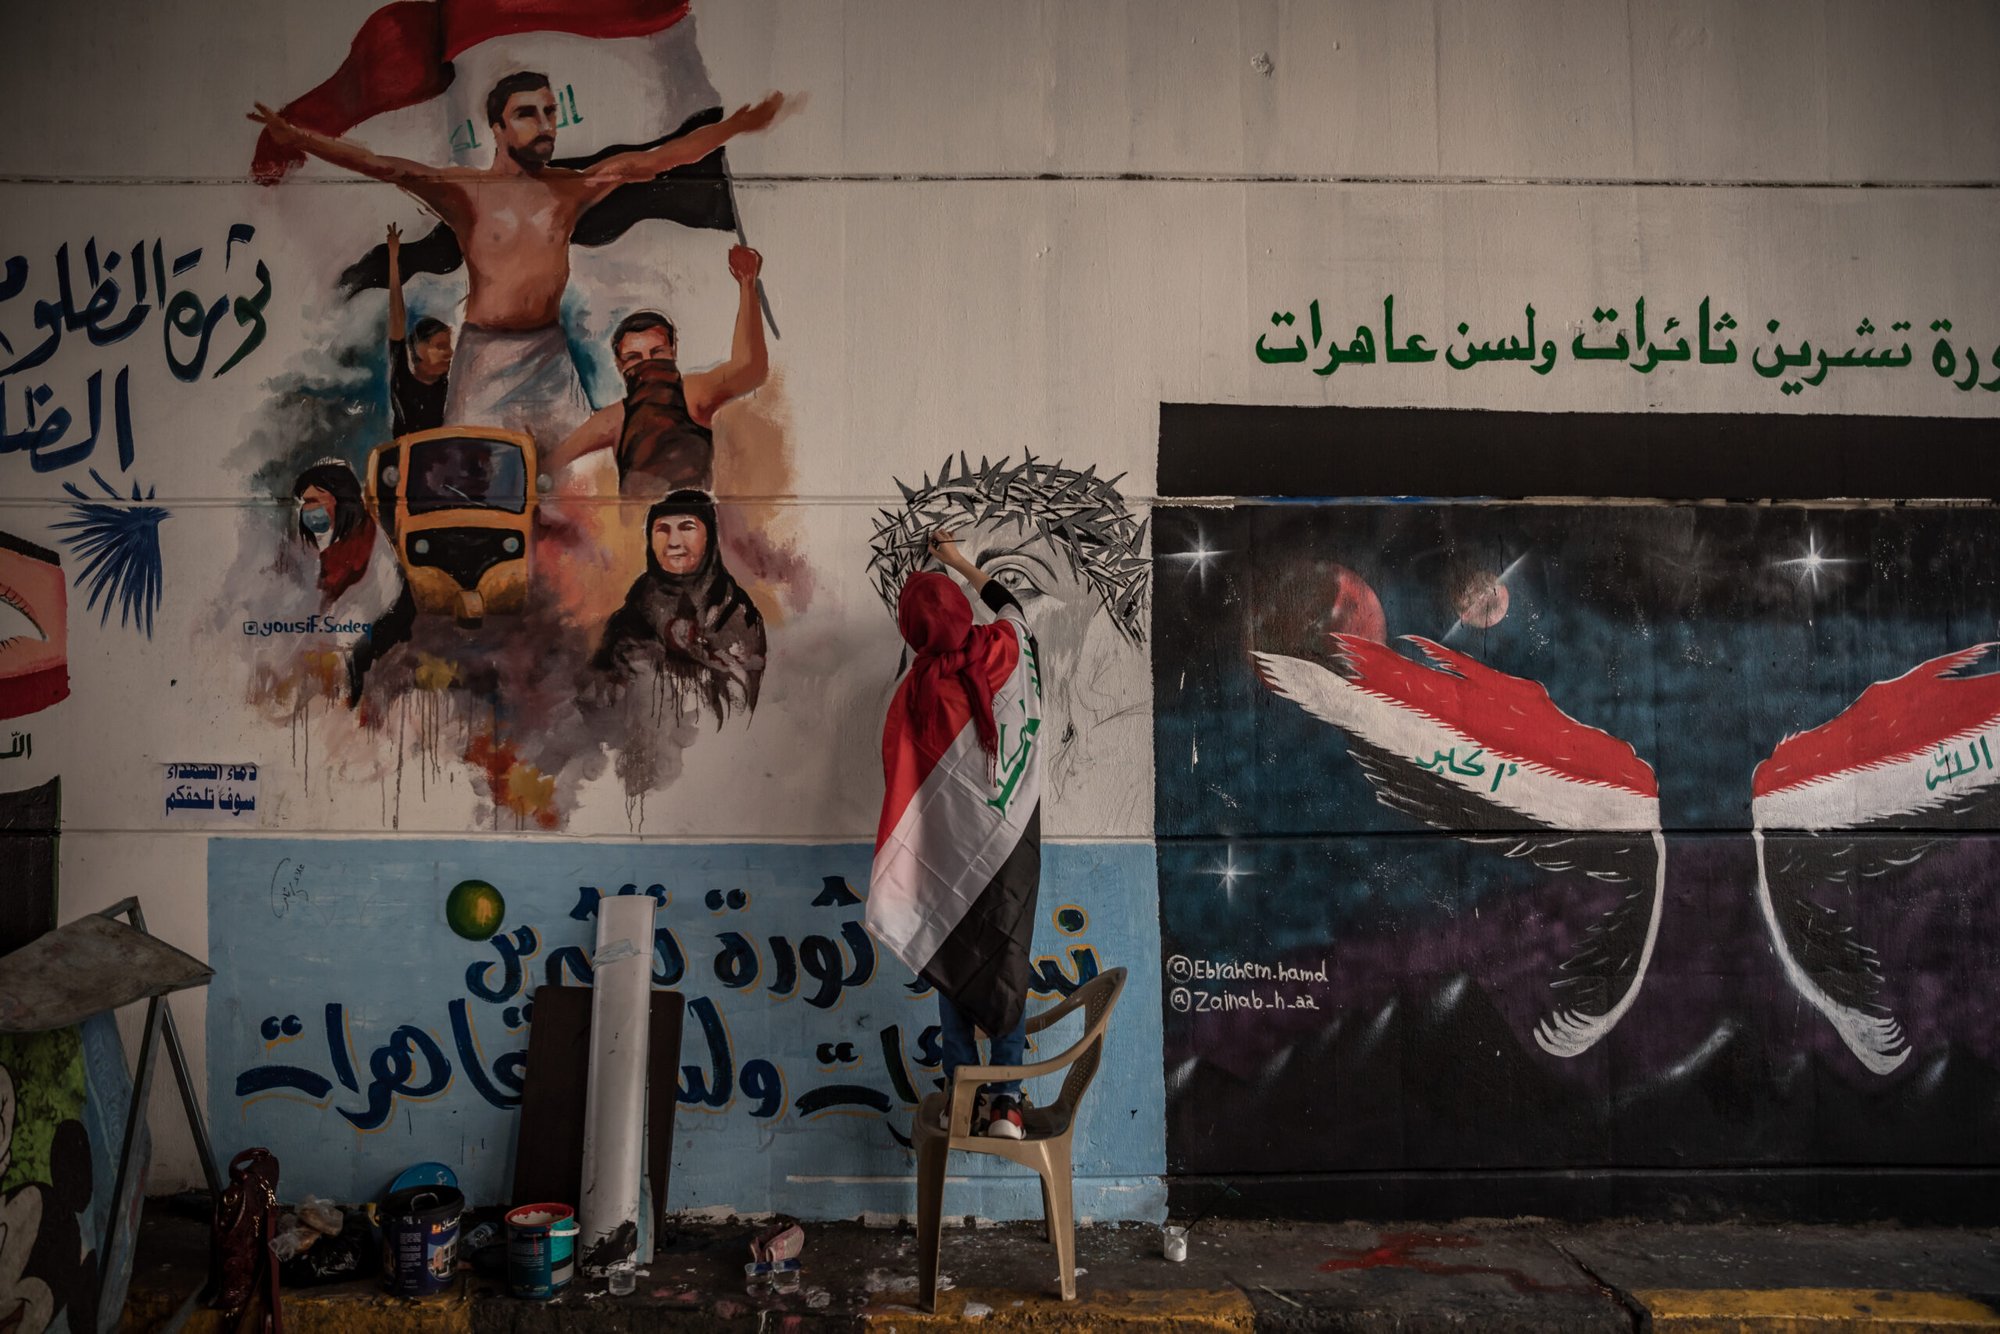 An antigovernment supporter and artist paints a new mural in the underpass underneath Baghdad’s Tahrir Square.